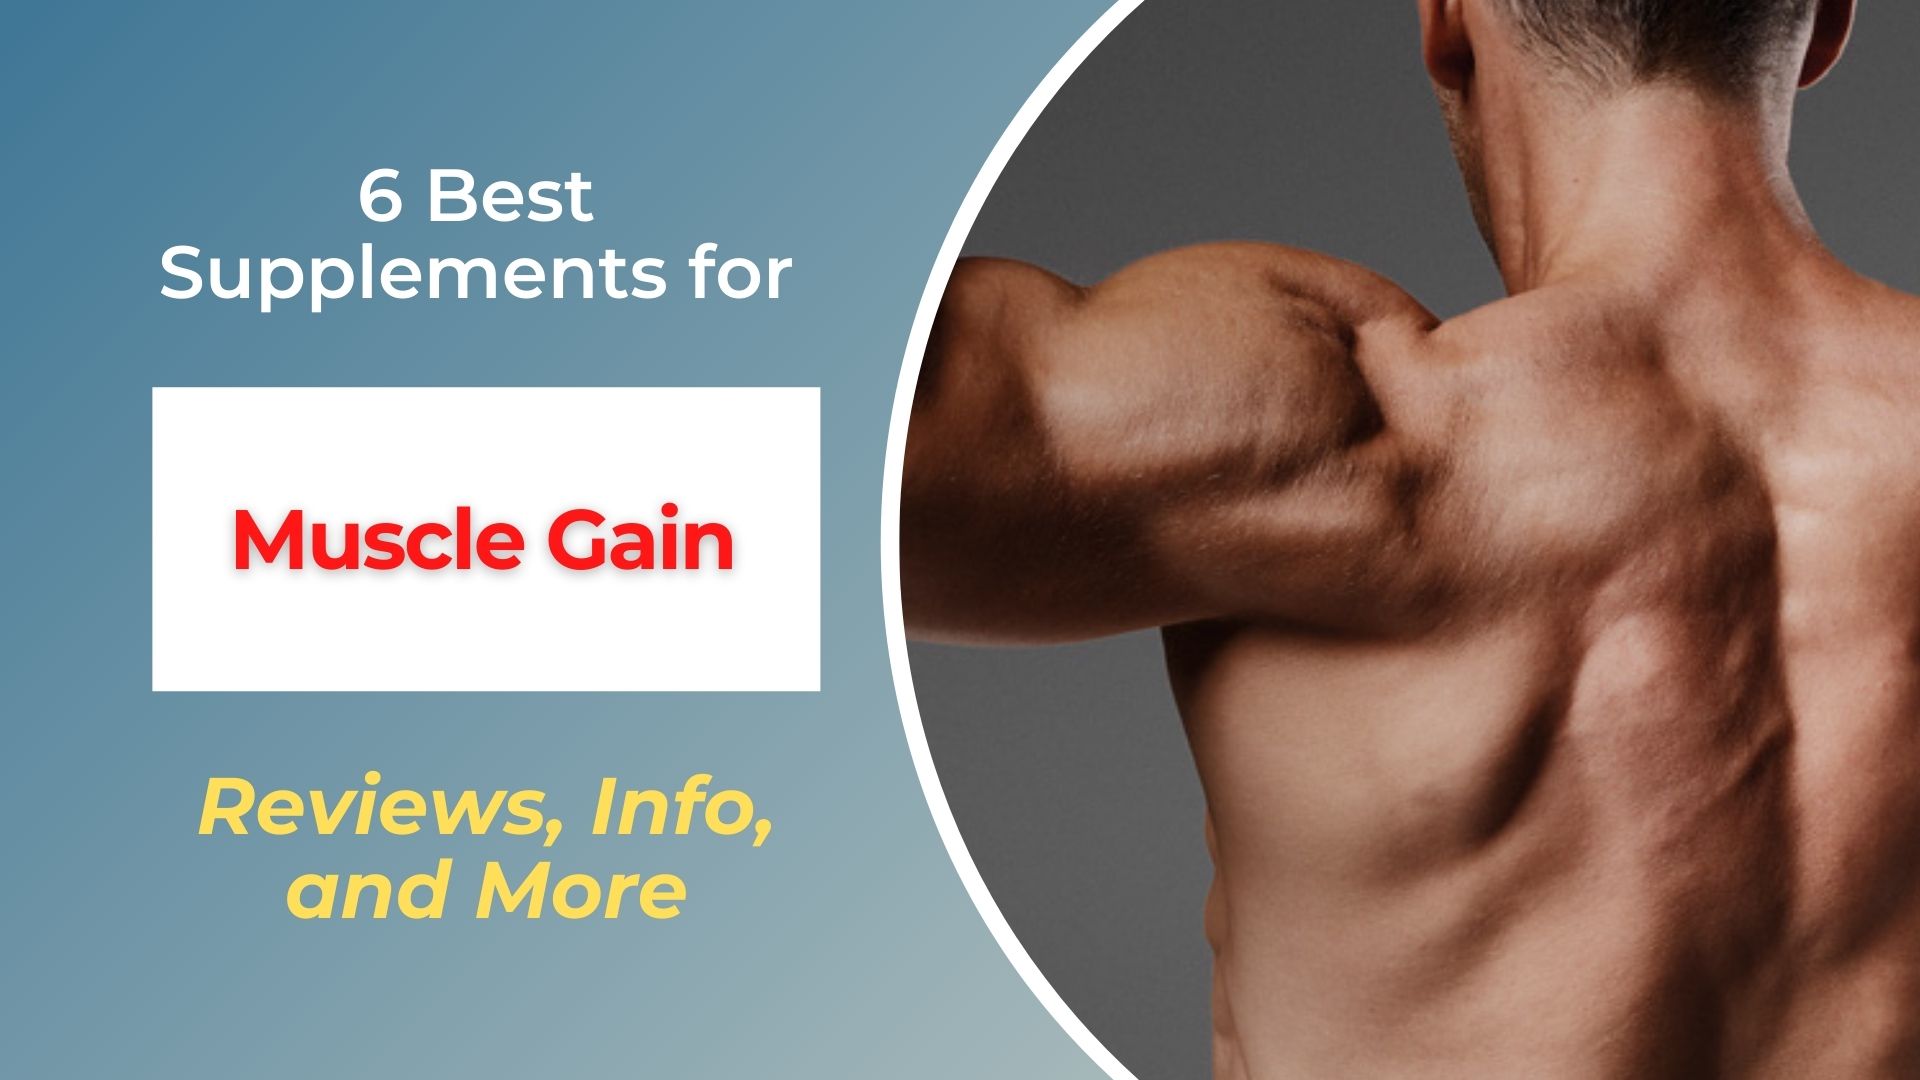 Best Supplements for Muscle Gain